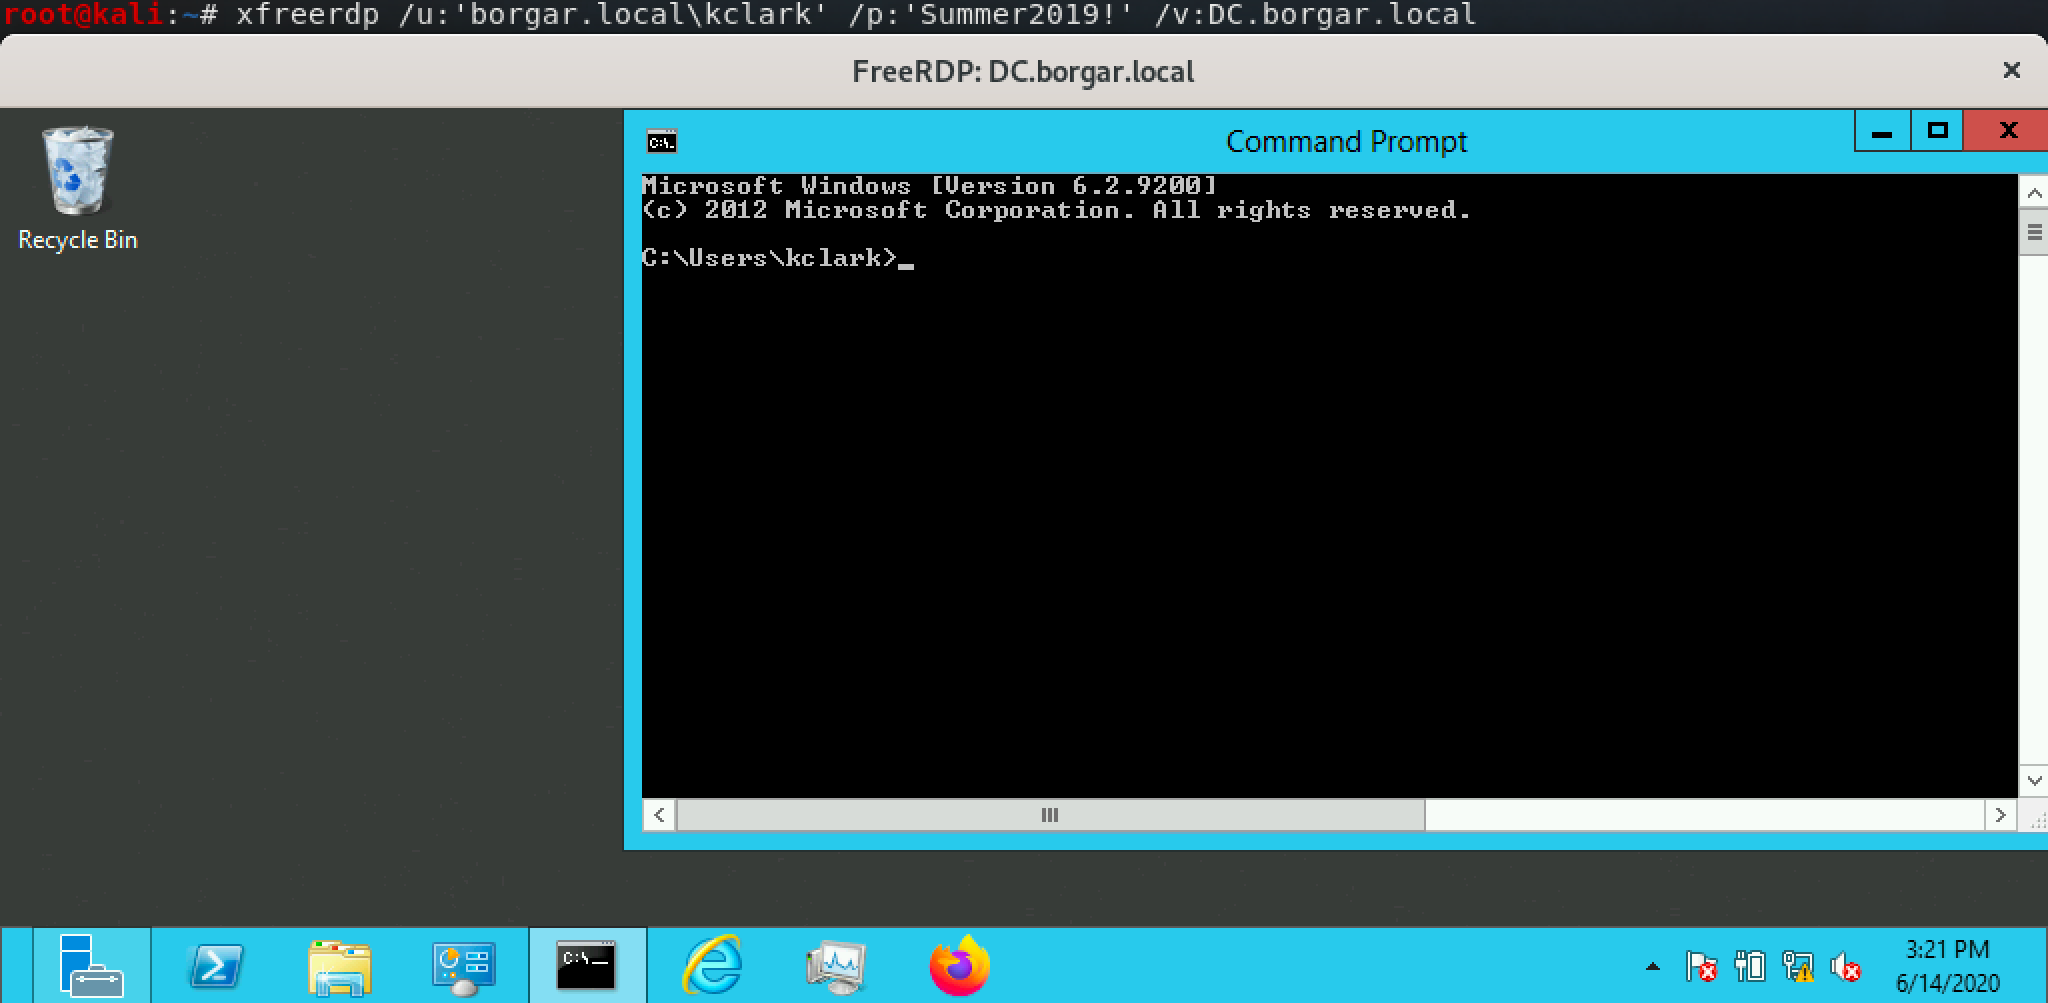 Using XFreeRDP to log in from Kali Linux